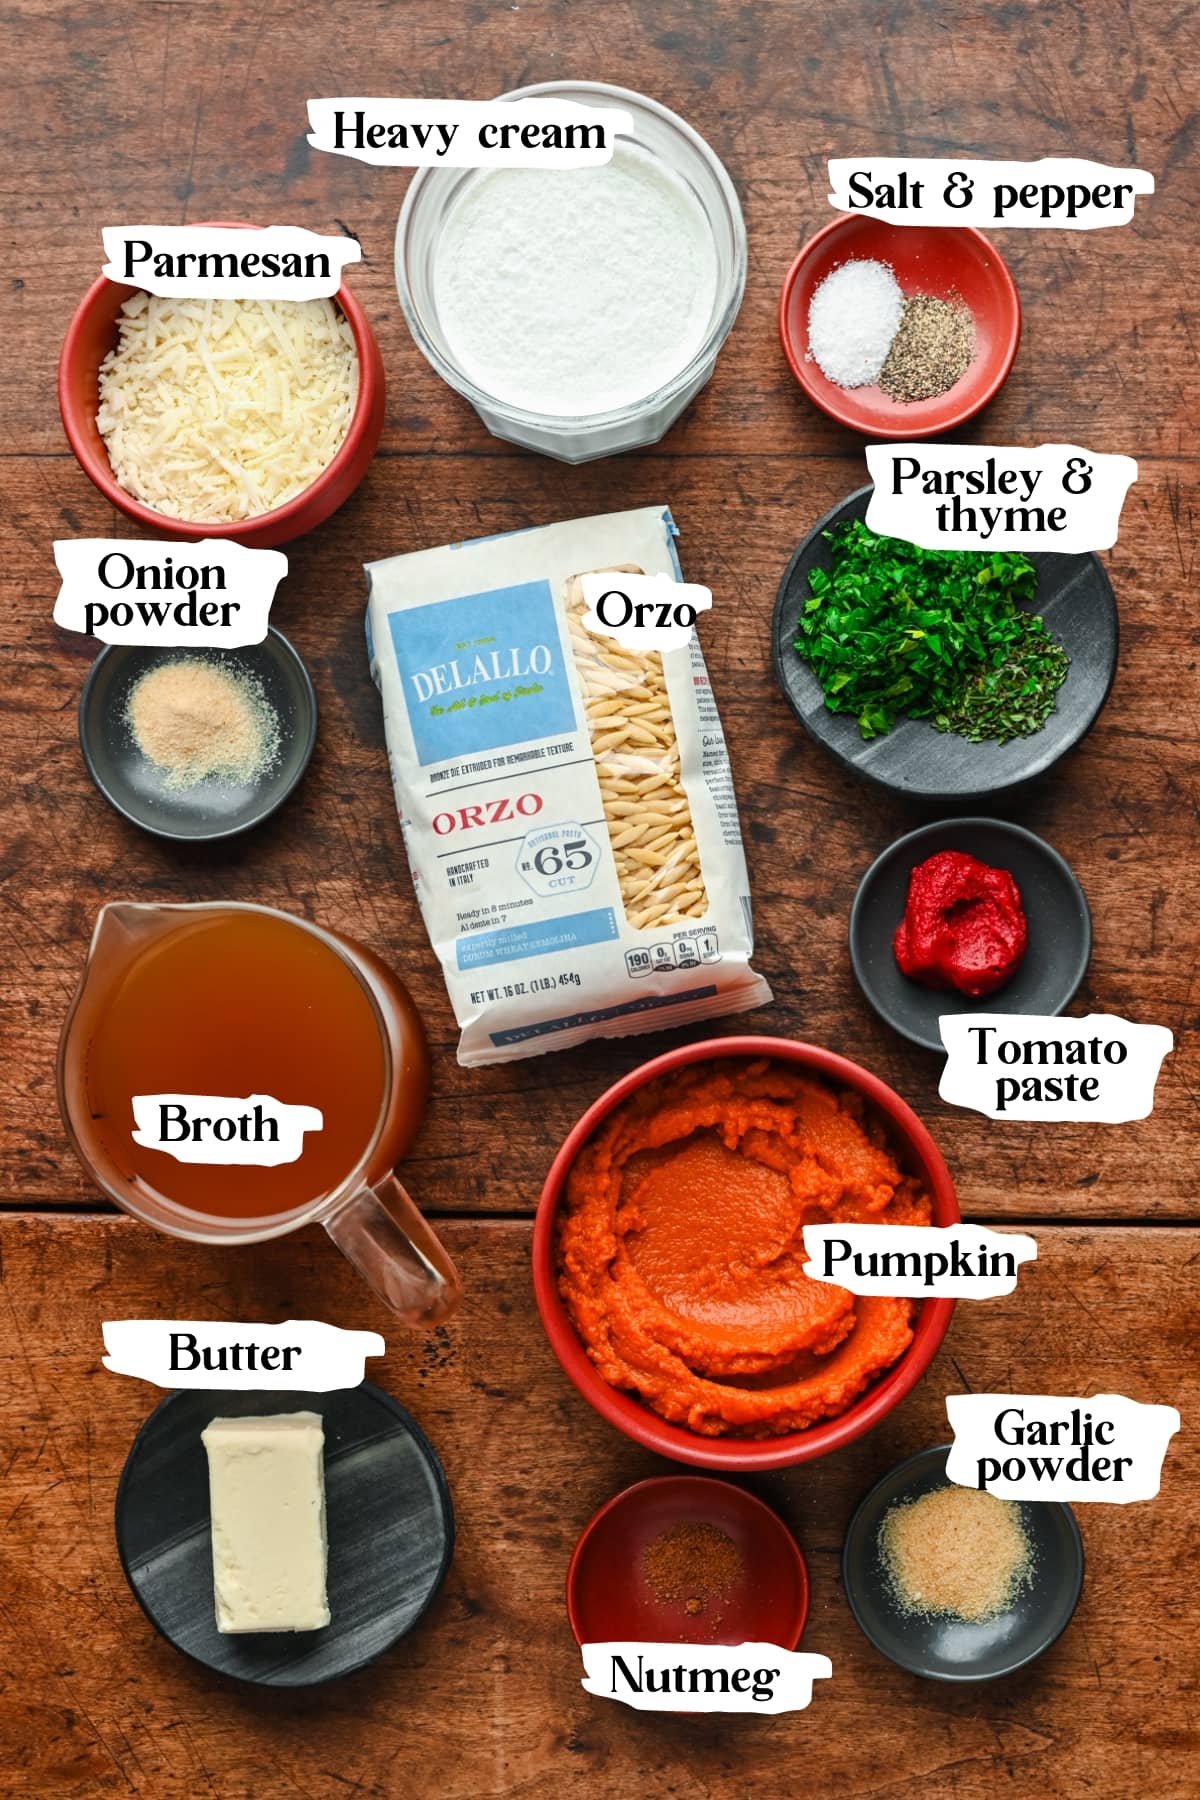 Overhead view of ingredients for pumpkin orzo with text labels.